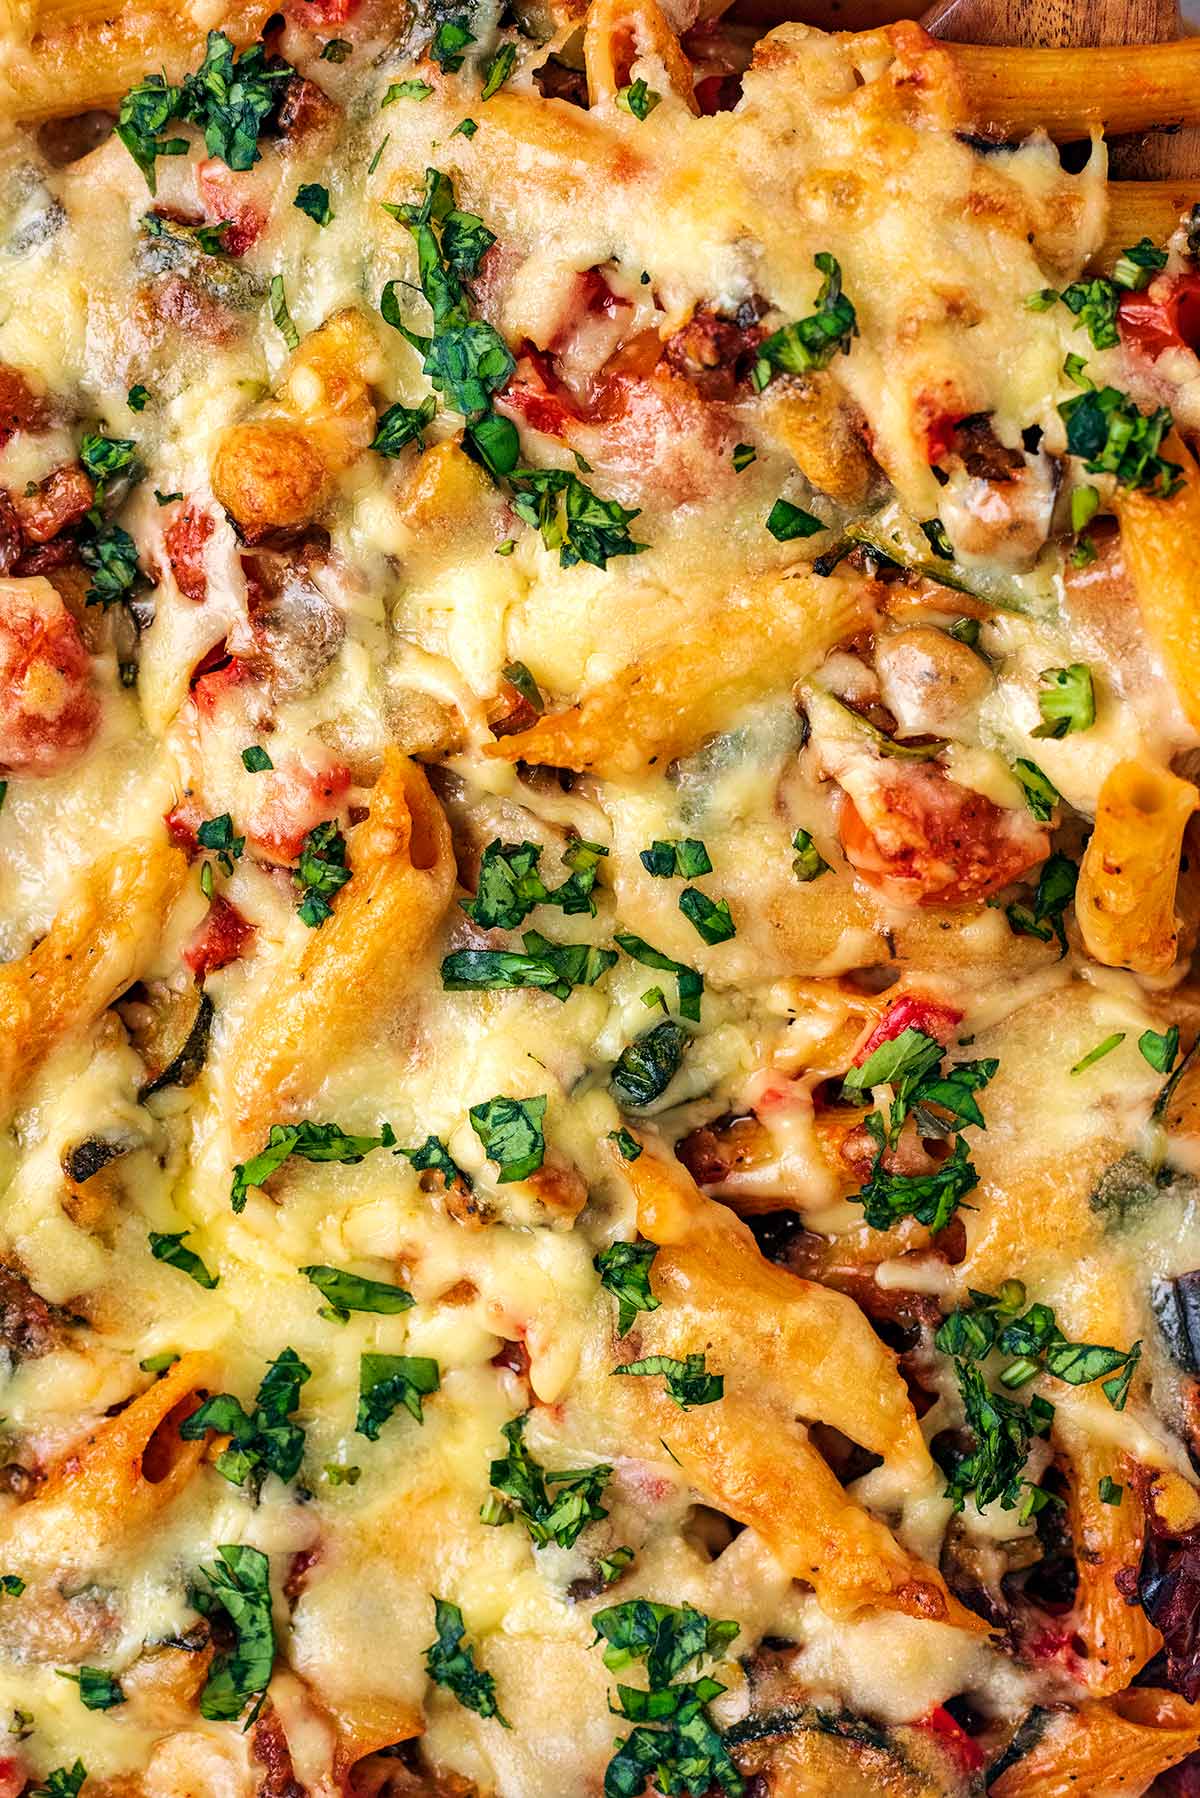 Chopped basil on top of a cheesy topped pasta bake.